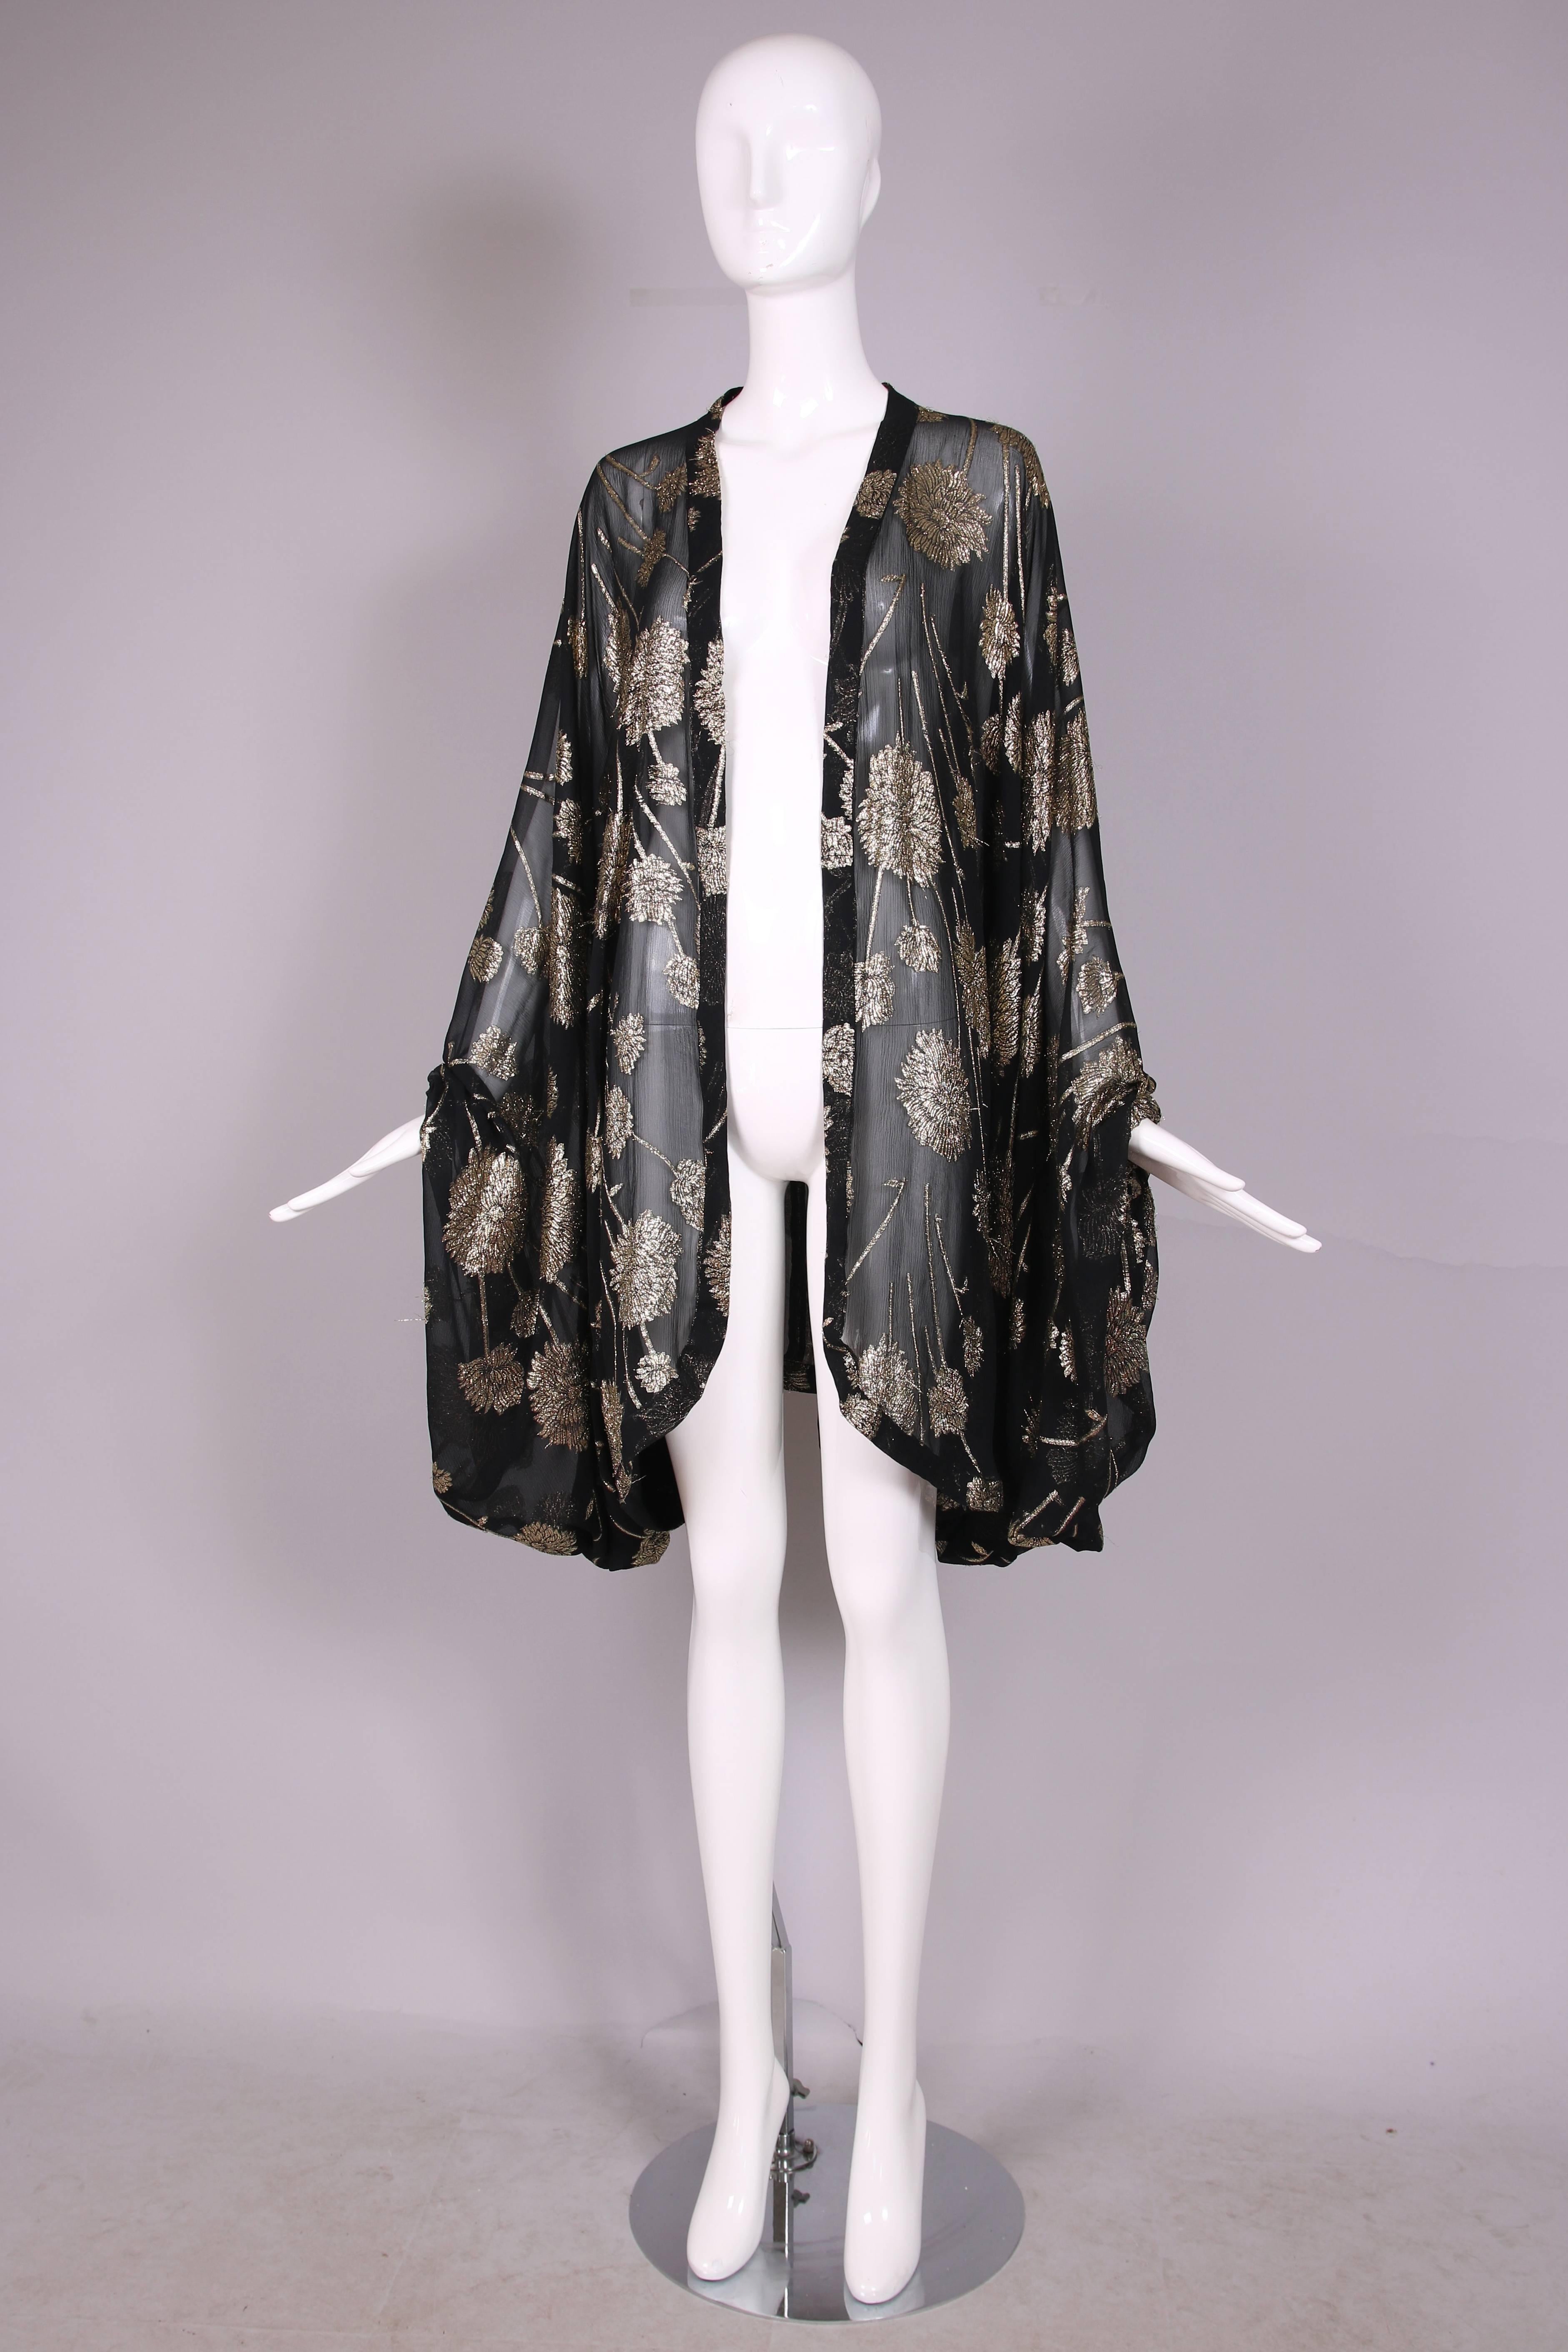 Vintage sheer black and gold metallic floral print silk chiffon cocoon shaped shawl with elastic armholes. In excellent condition. No tag.
MEASUREMENTS:
Length - 36